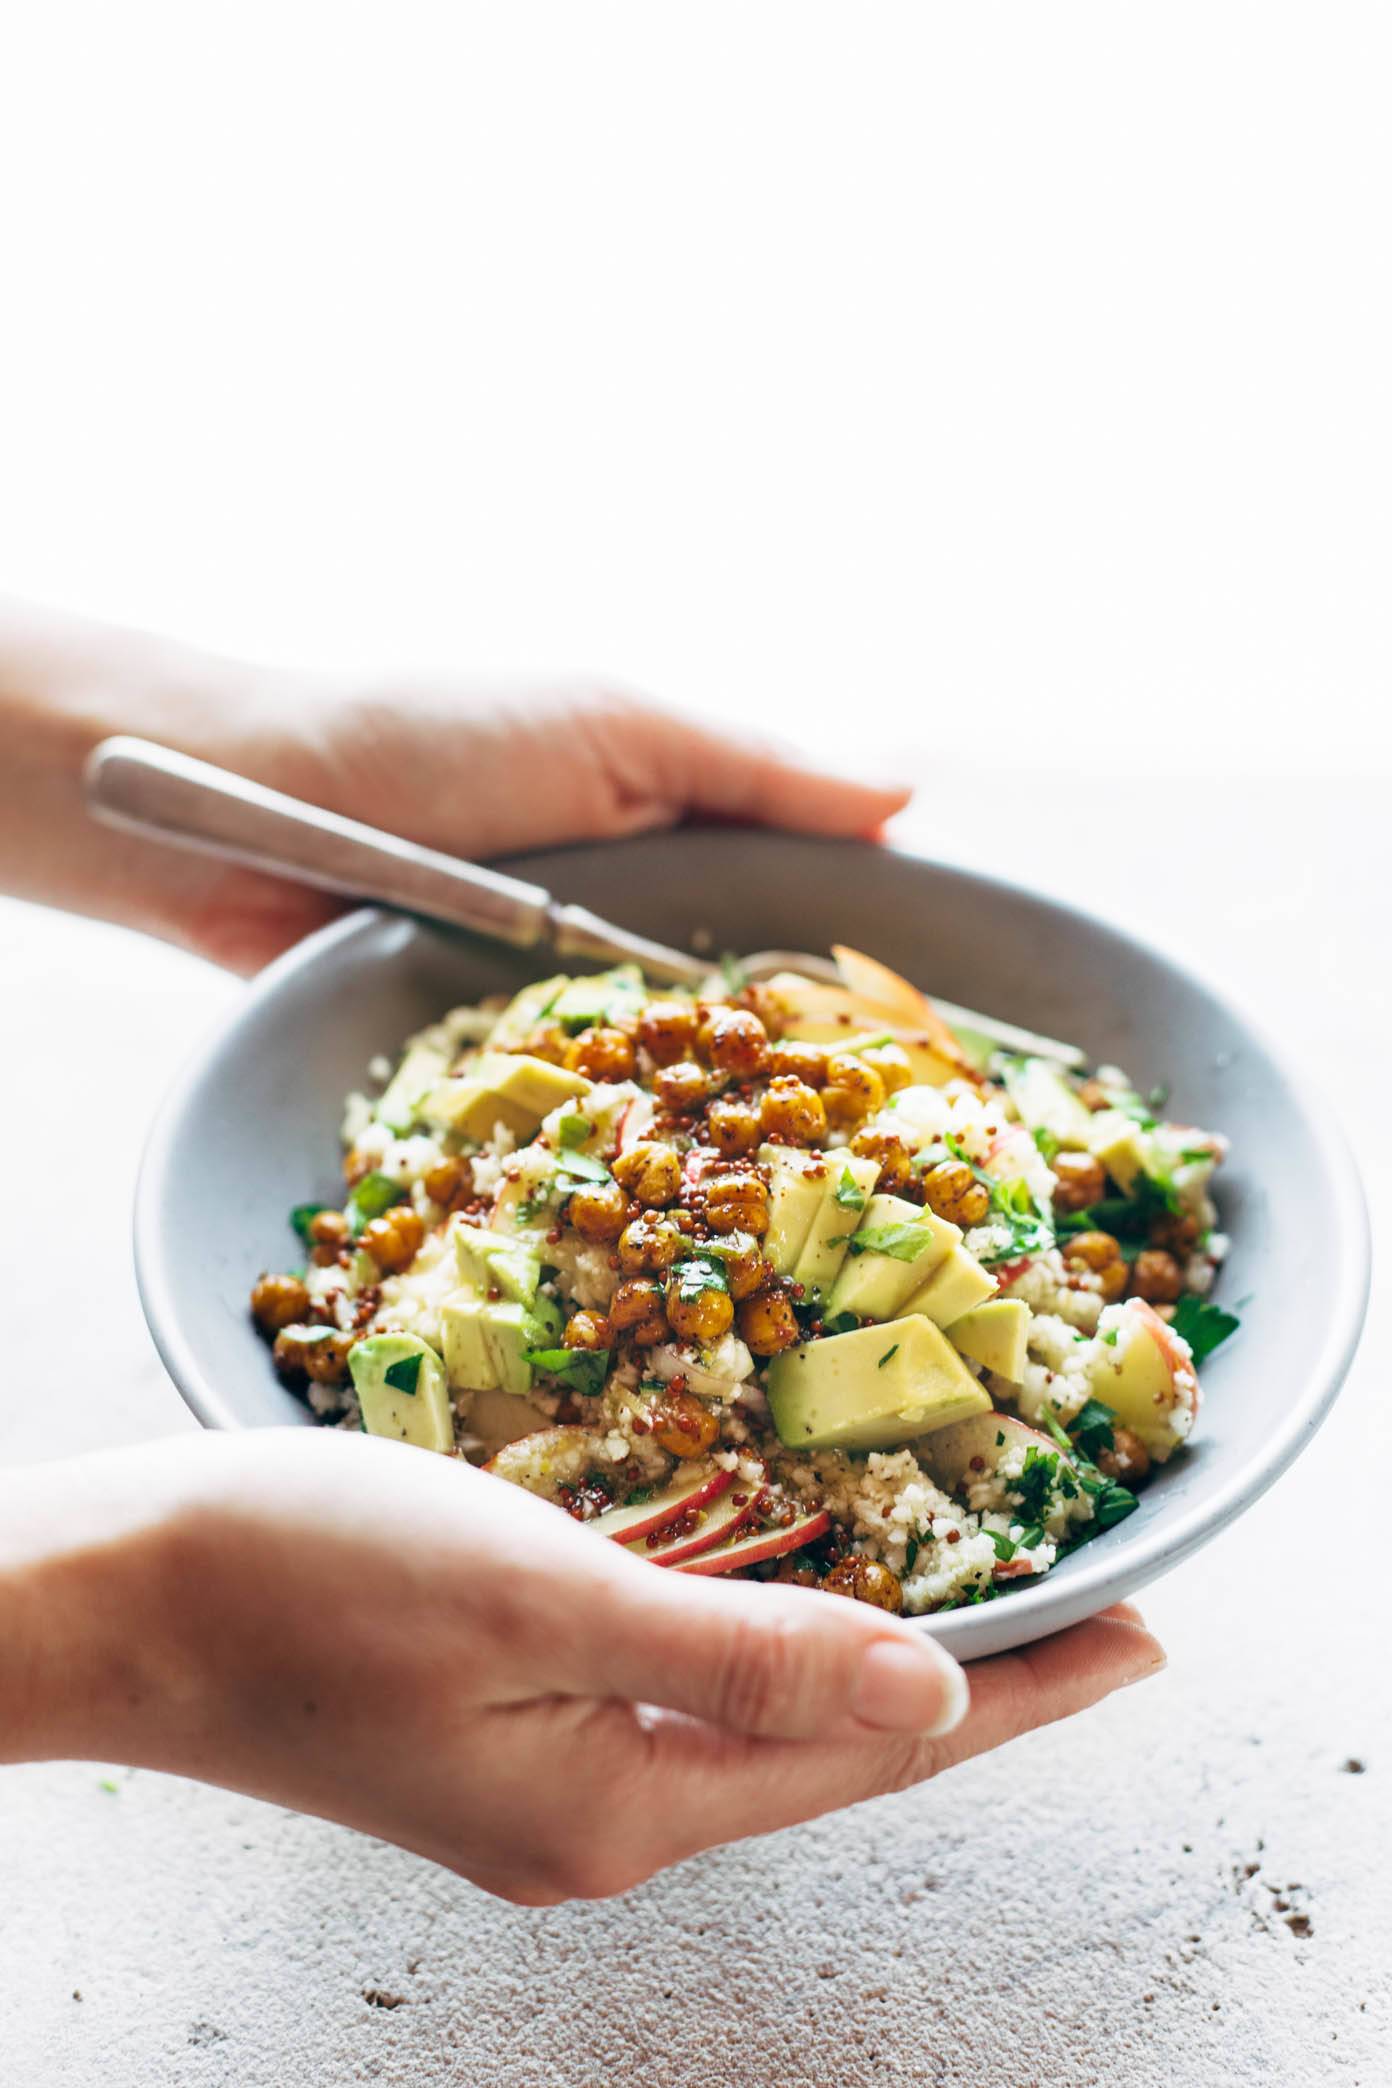 Hands holding Spring Detox Cauliflower Salad in a bowl with a fork.